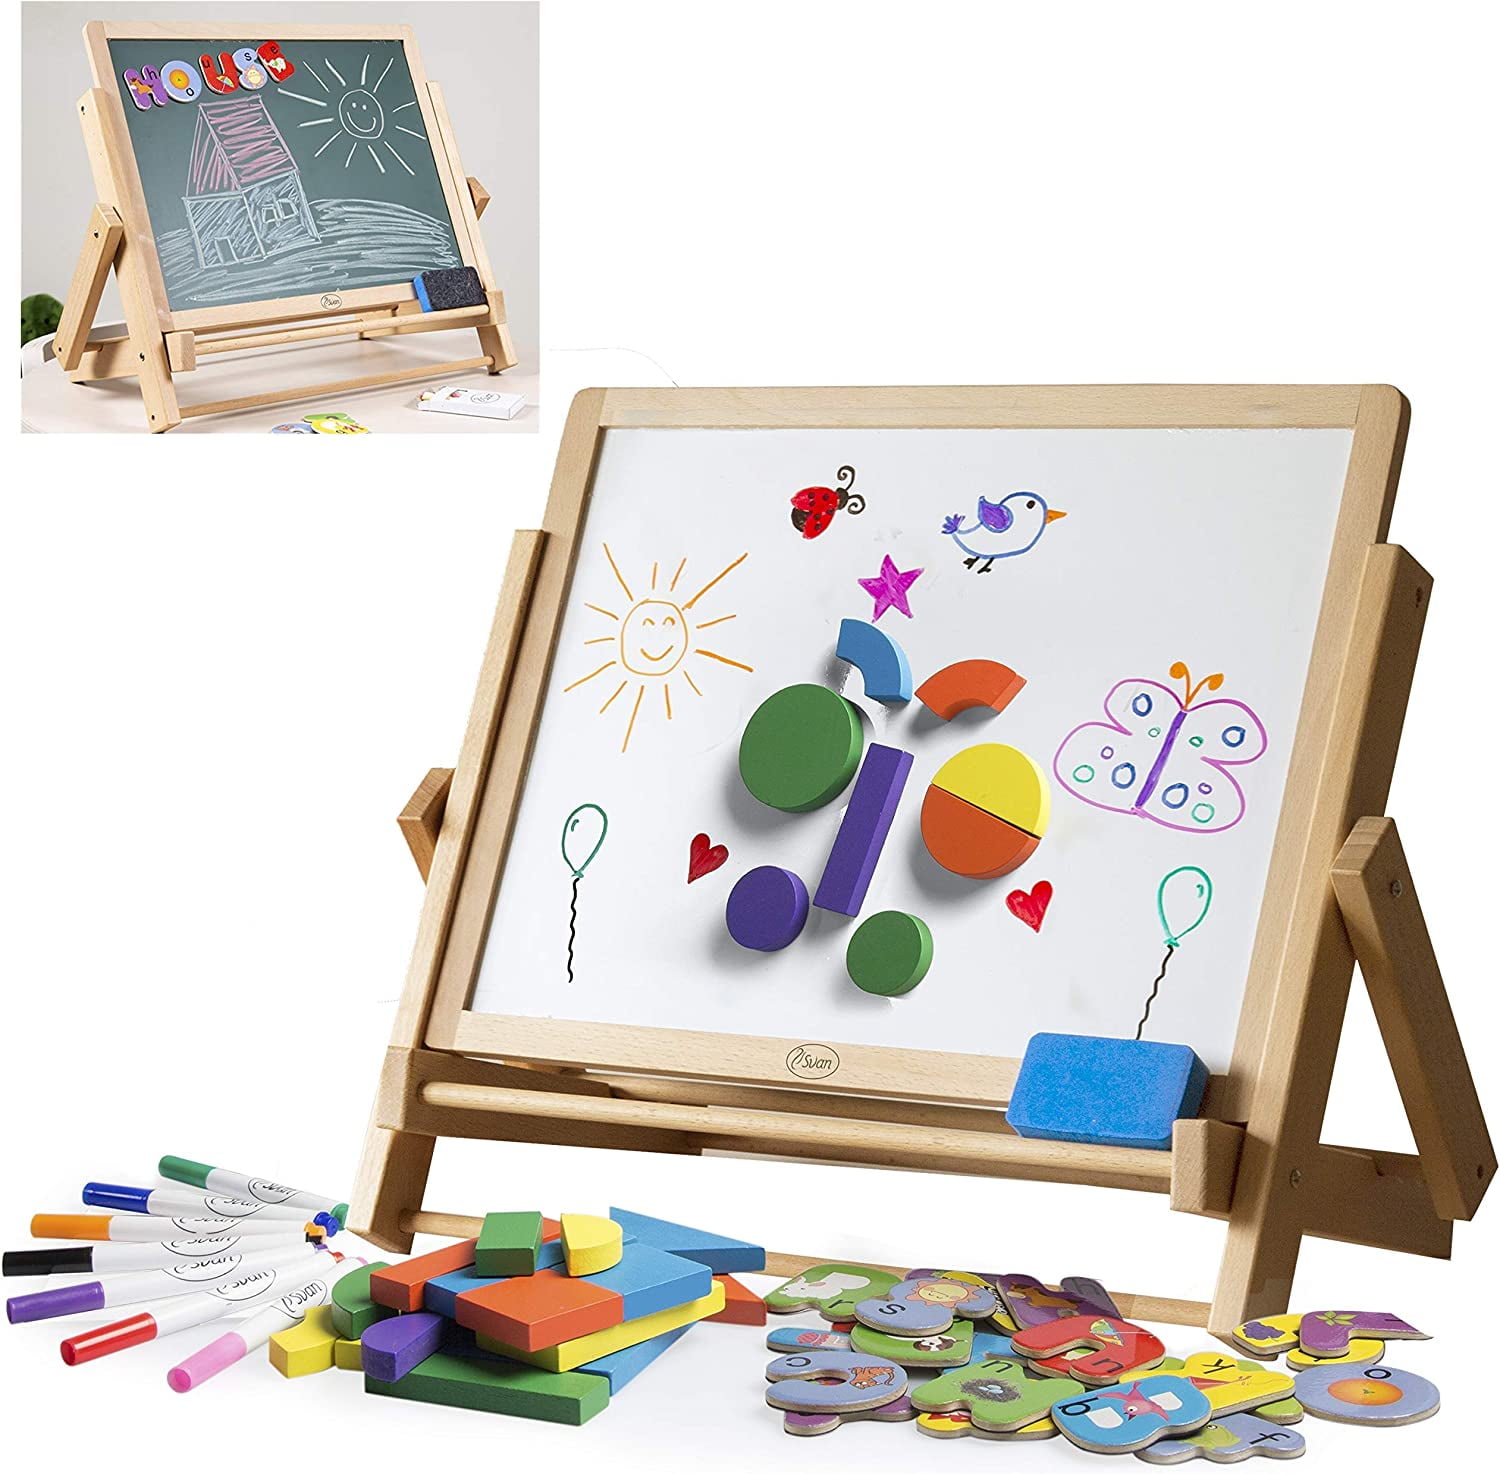 Svan Double Sided Indoor/Outdoor Plexiglass Art Easel (21 x 36 x 51 in) - Easy to Clean Kids Can Draw or Paint on Both Sides